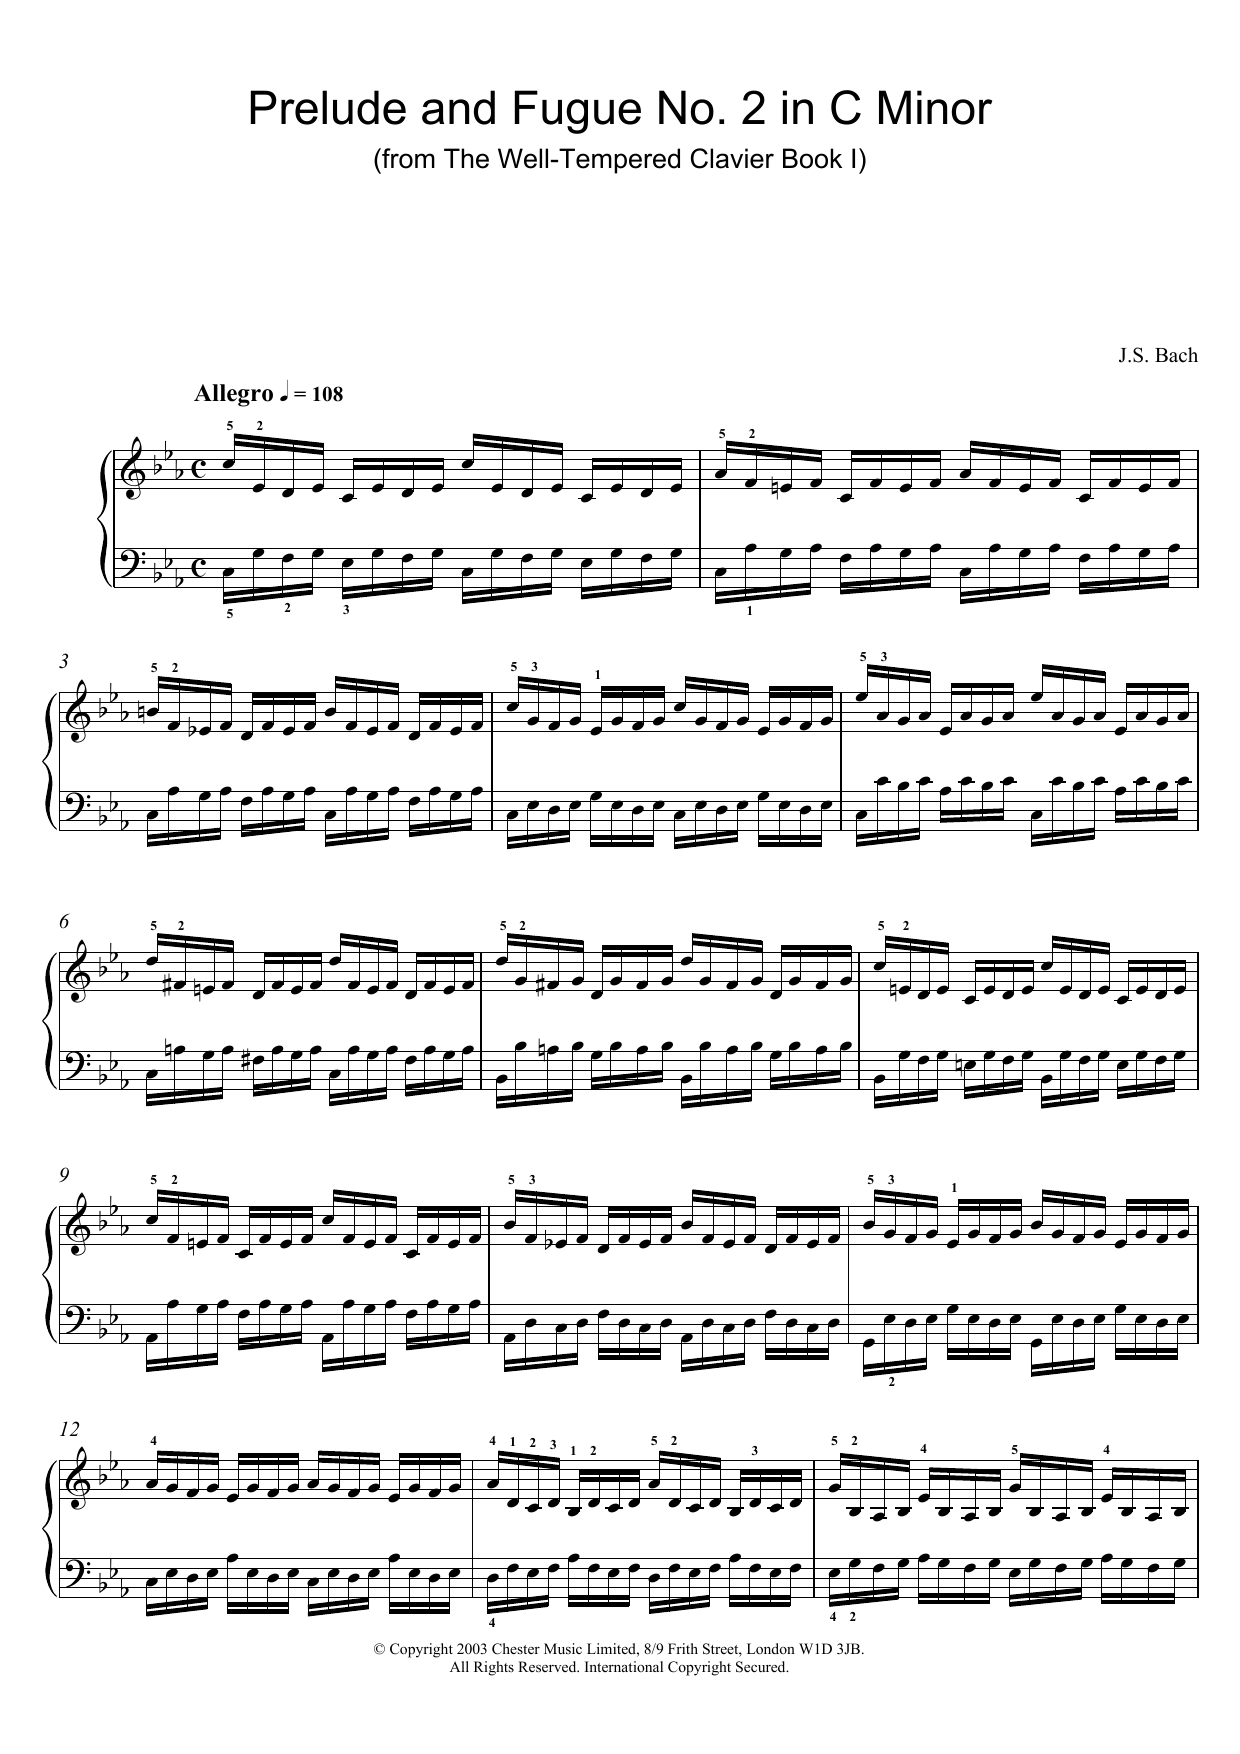 J.S. Bach Prelude and Fugue No.2 in C Minor (from The Well-Tempered Clavier, Bk.1) sheet music preview music notes and score for Piano including 5 page(s)